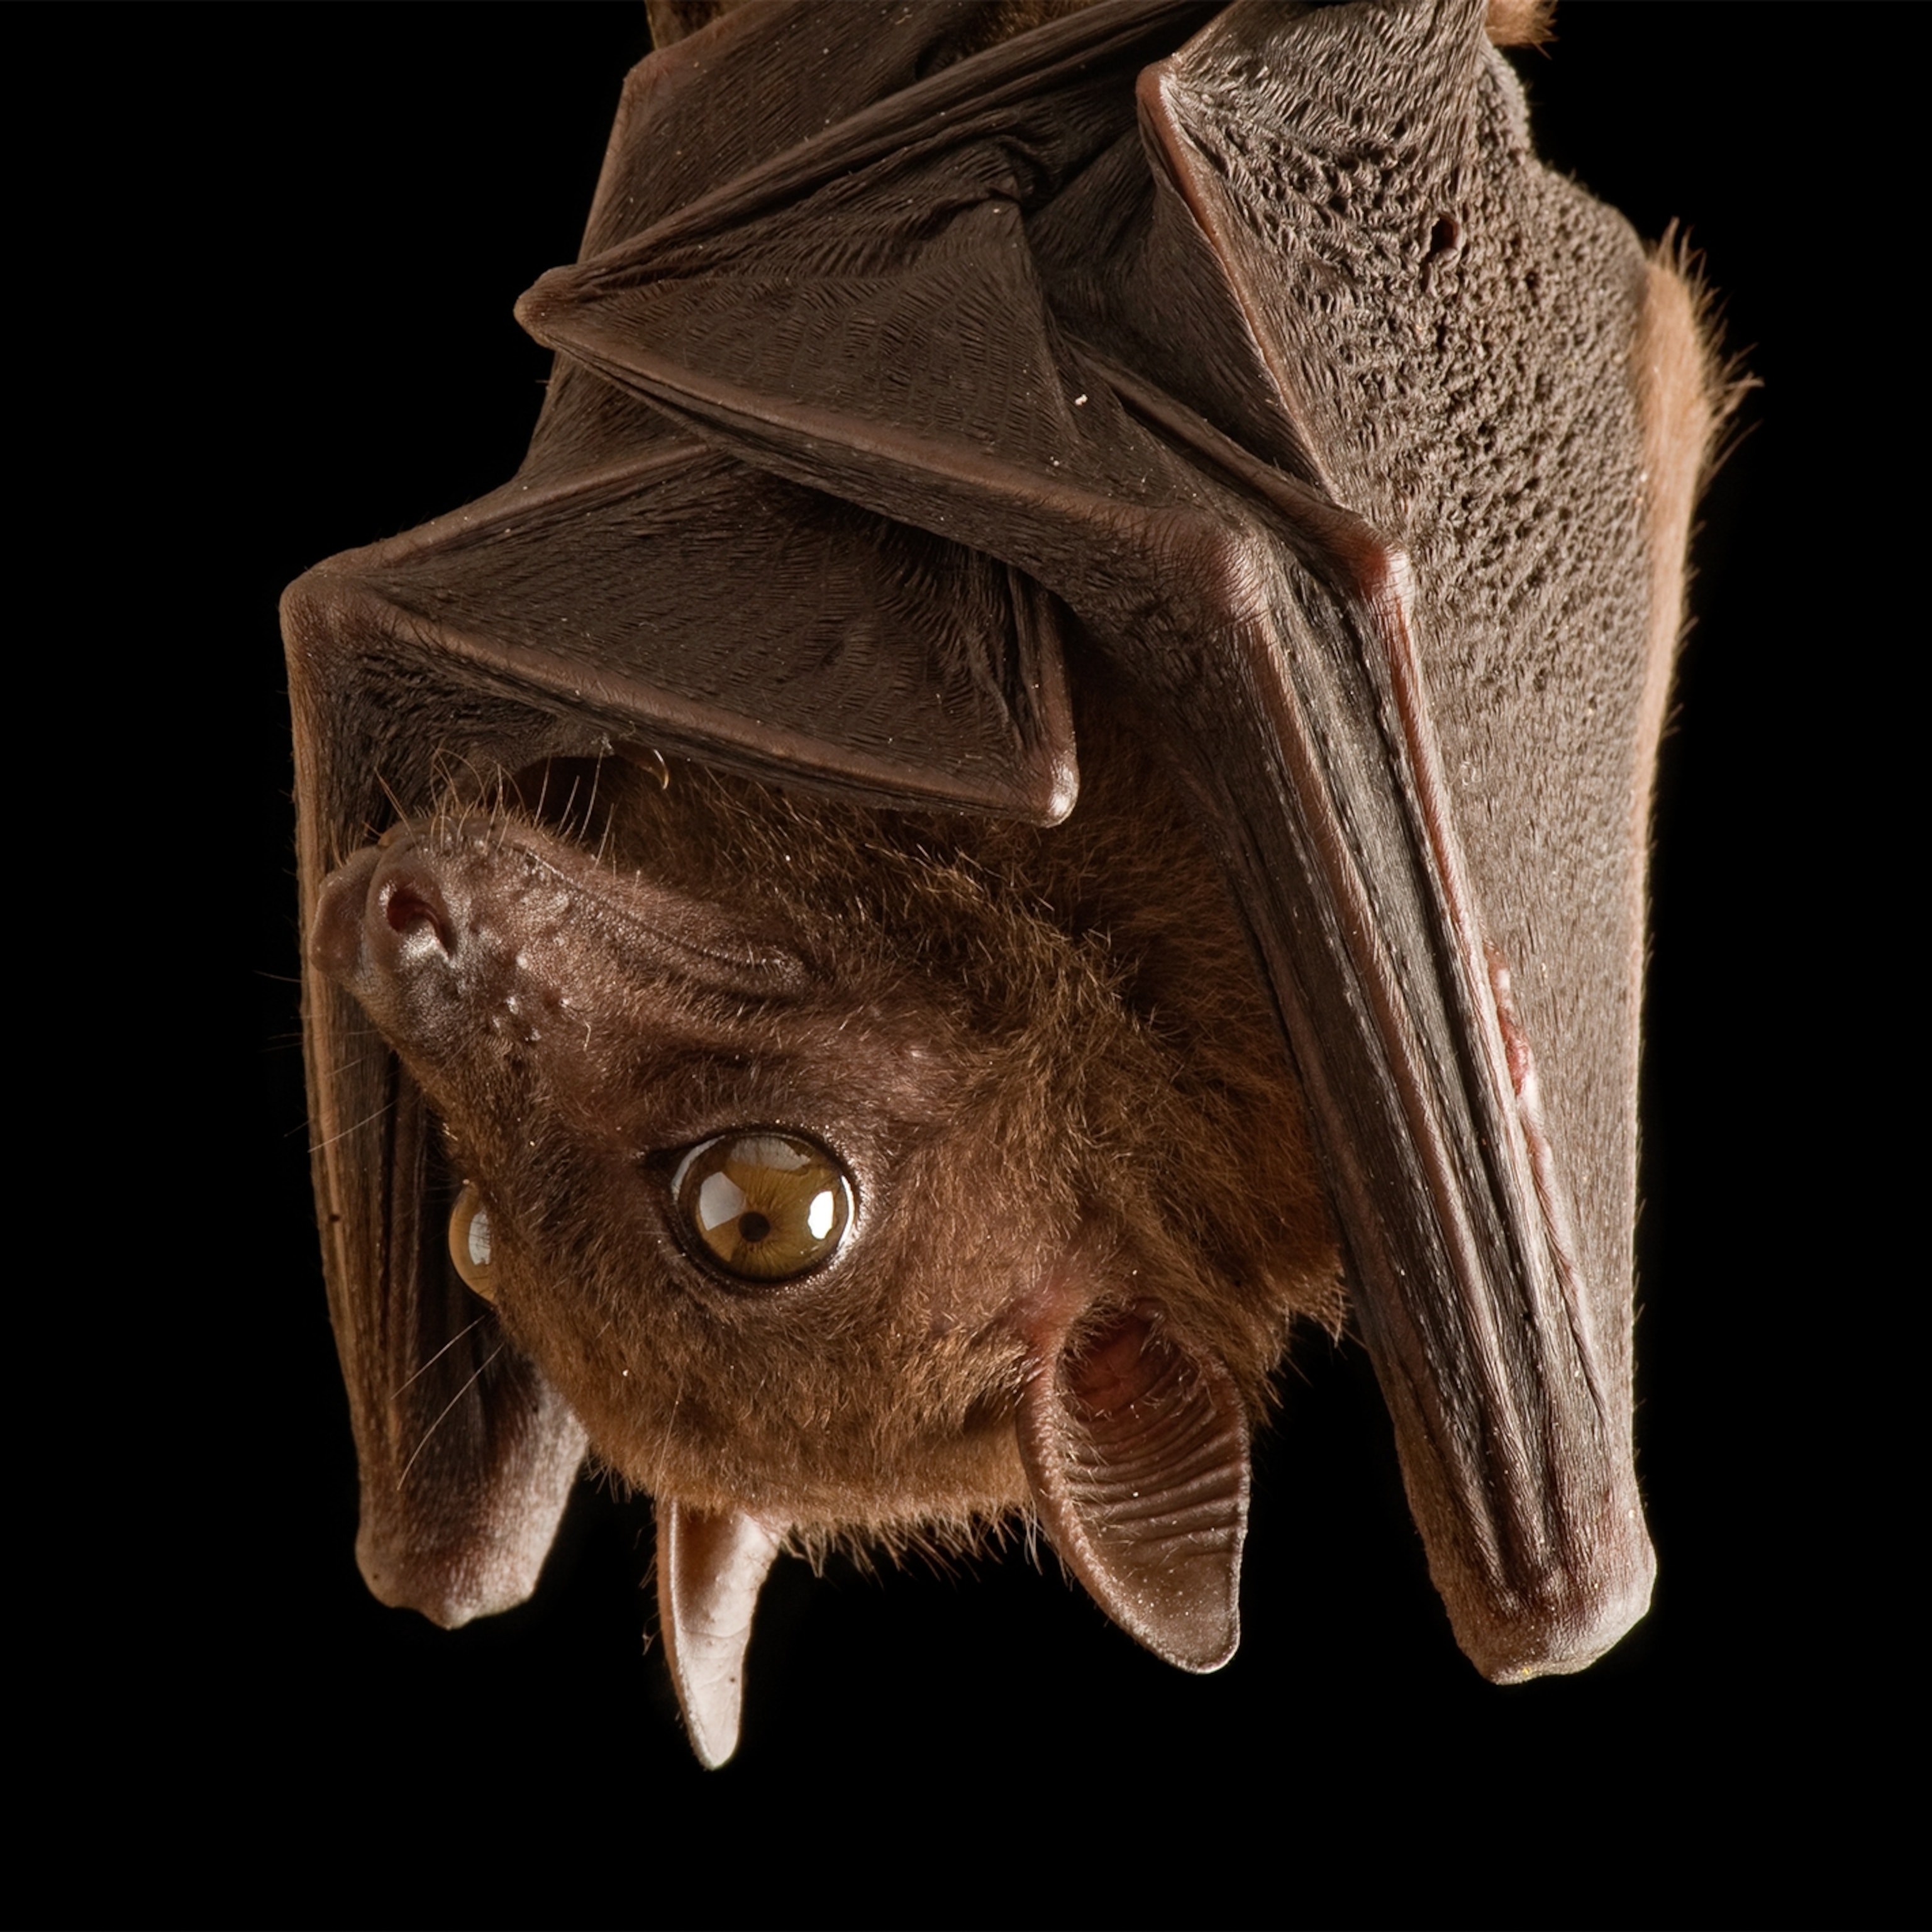 Bat Myths Busted: Are They Really Blind?